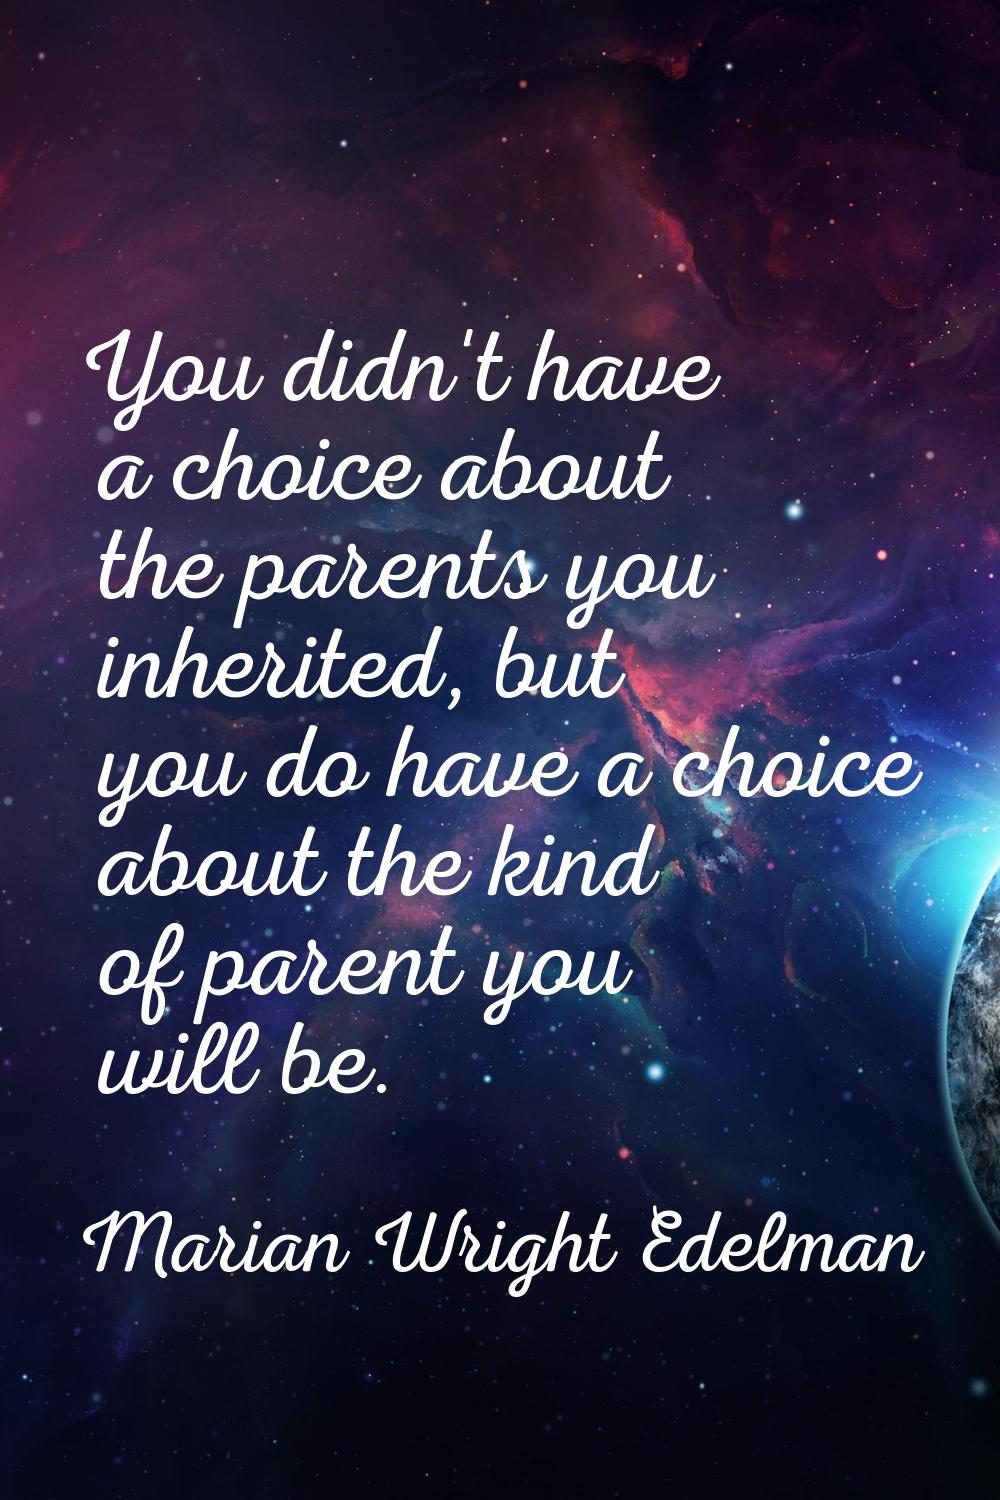 You didn't have a choice about the parents you inherited, but you do have a choice about the kind o